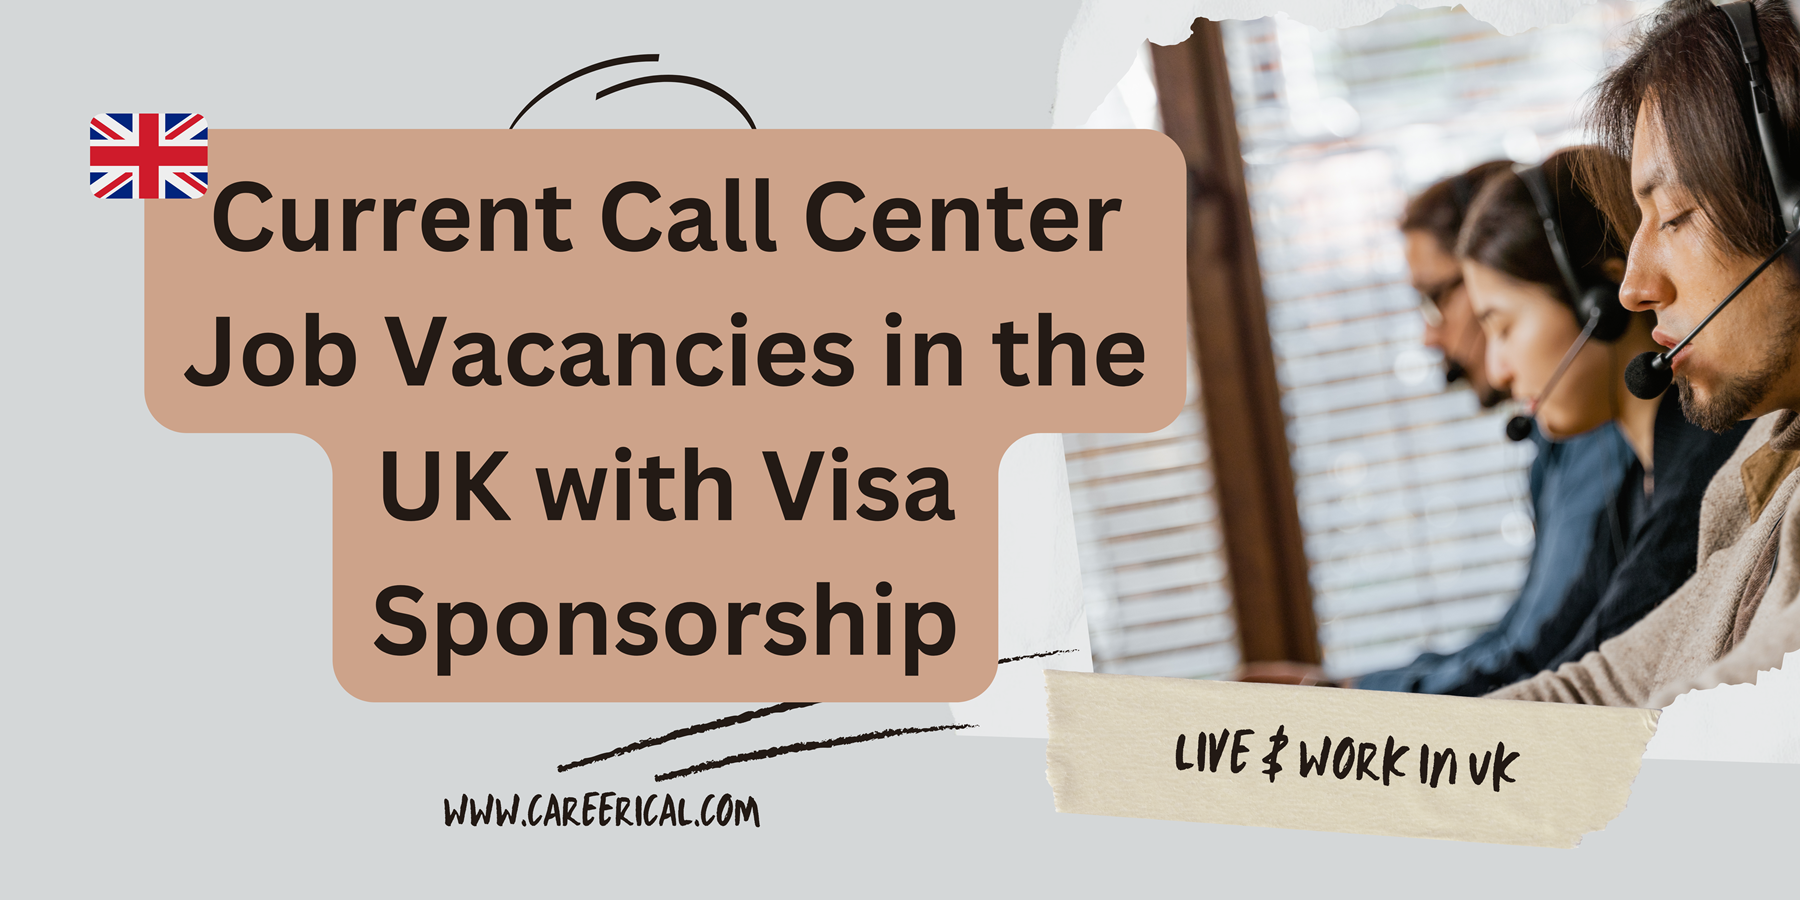 Current Call Center Job Vacancies in the UK with Visa Sponsorship